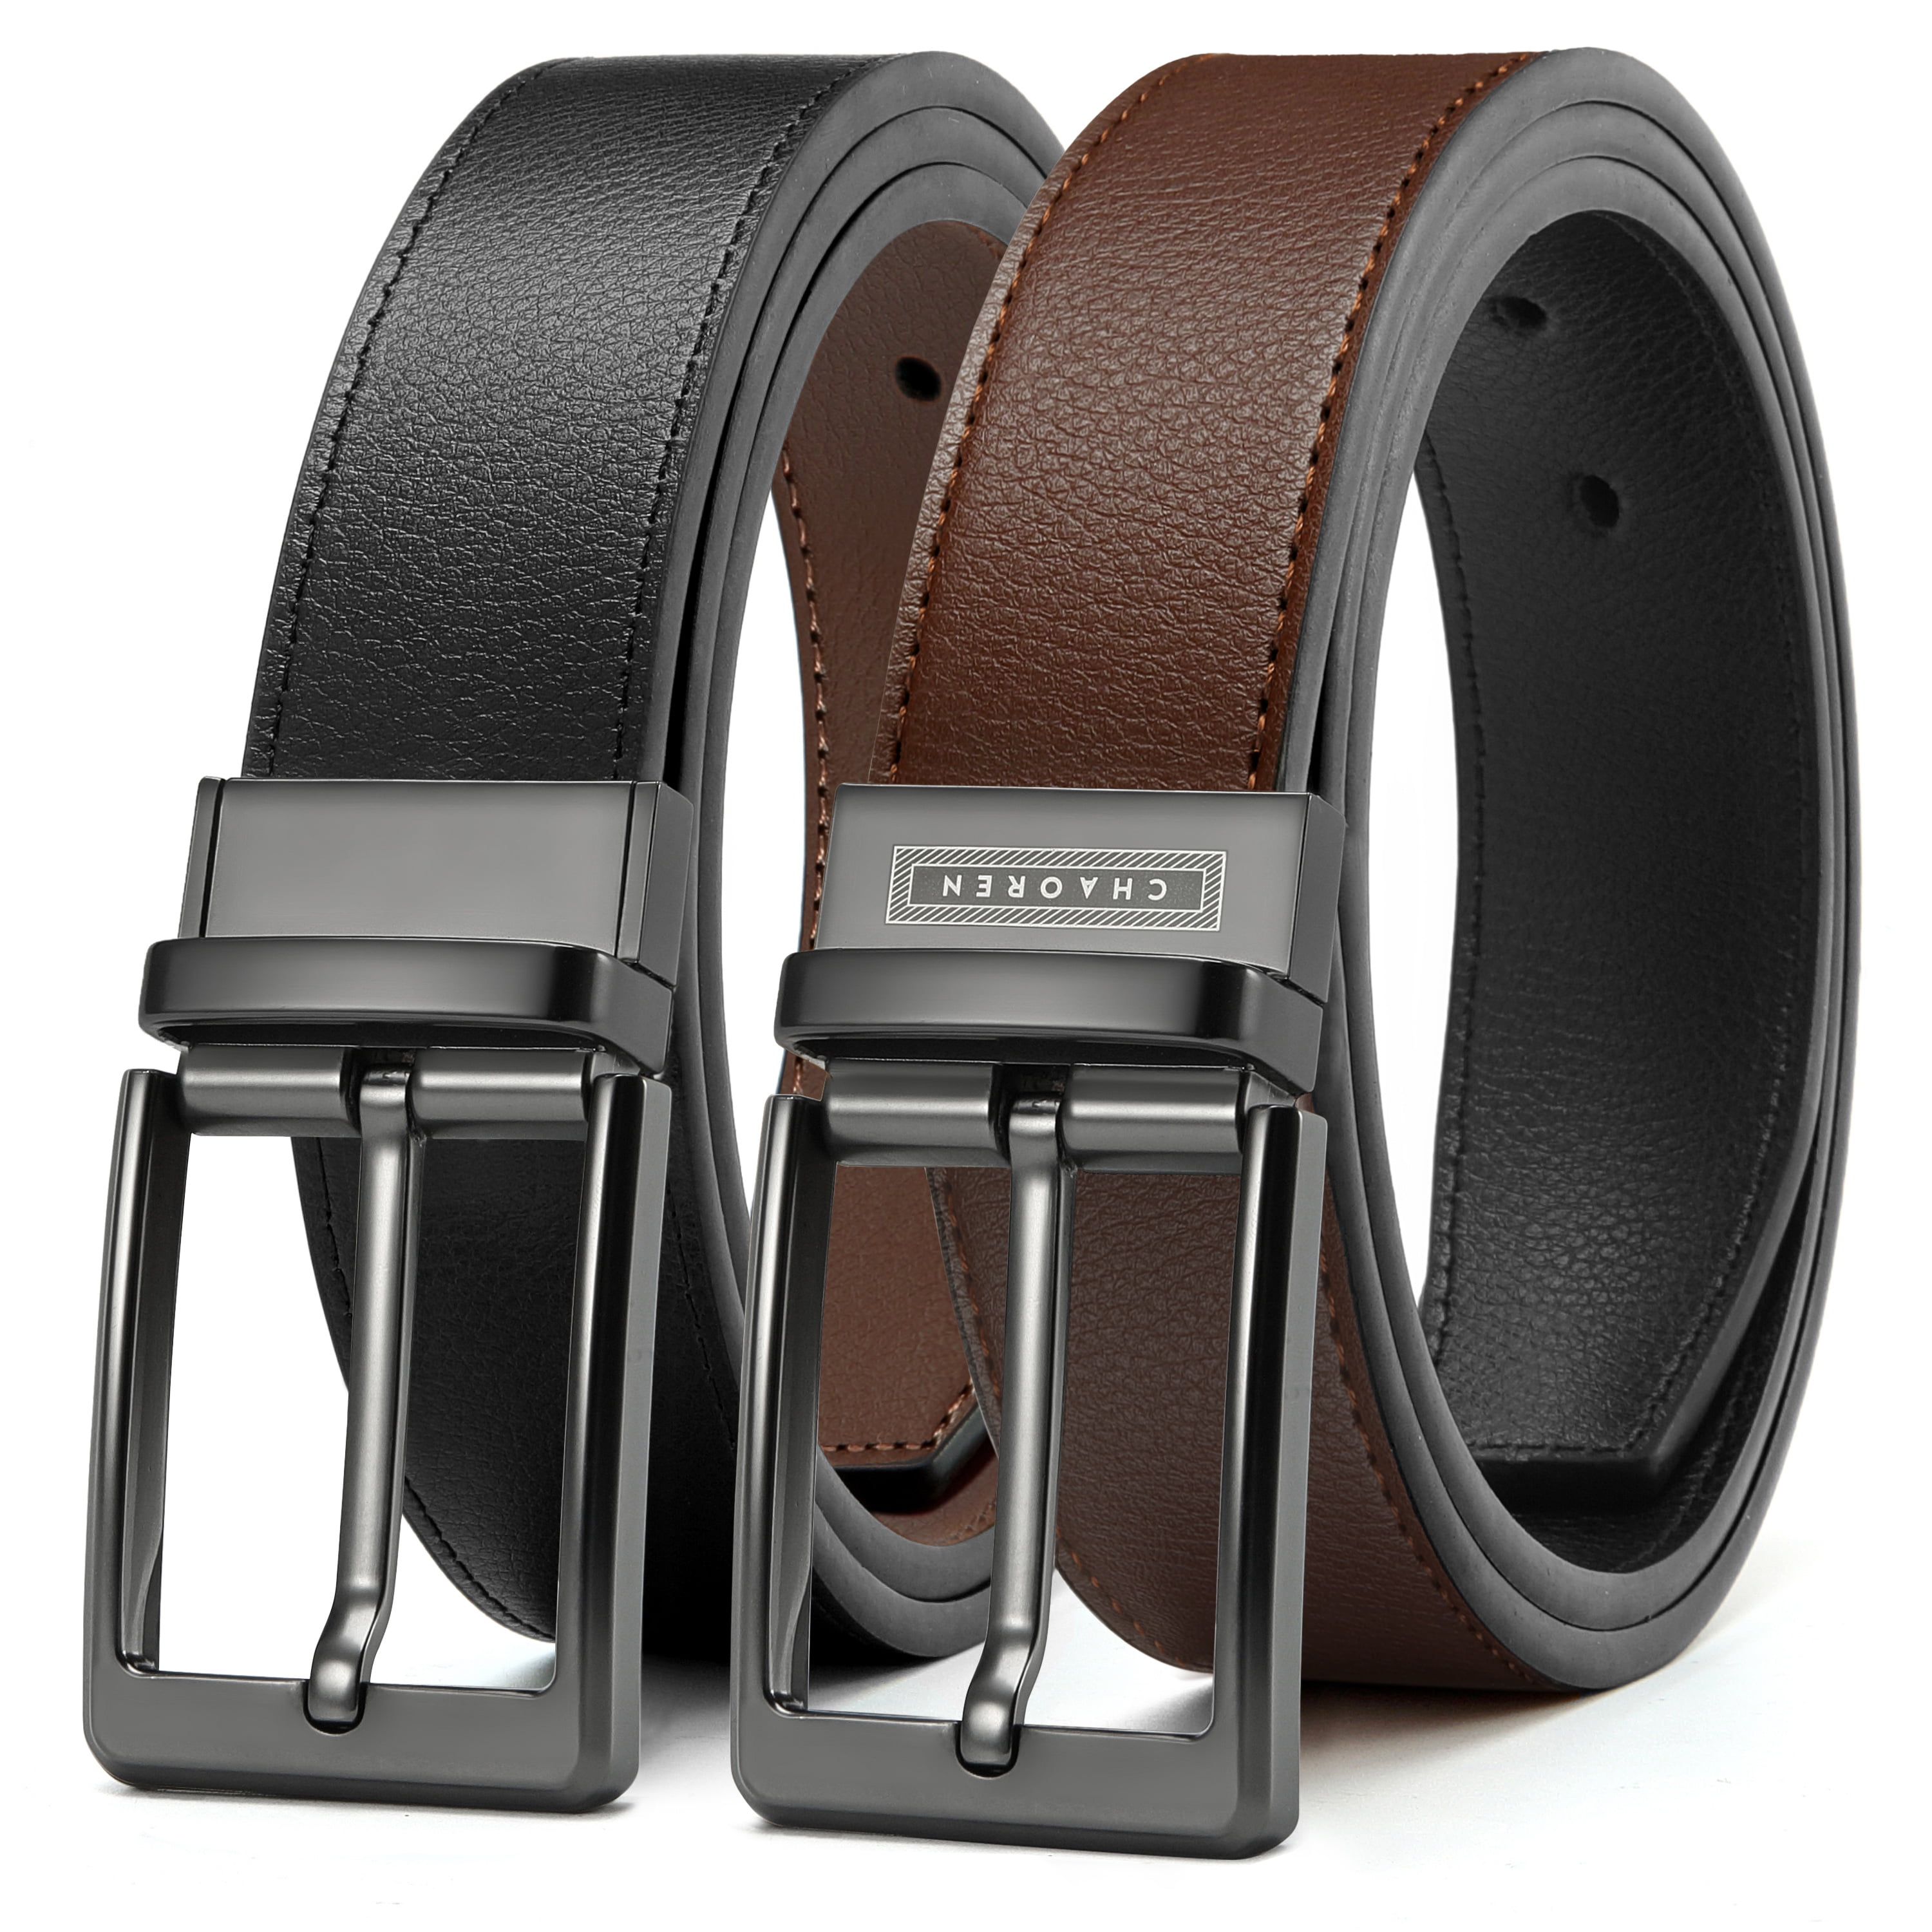 DRESS BELTS MENS SET OF TWO BLACK BROWN ALL SIZES FREE SHIPPING GREAT GIFT IDEA 